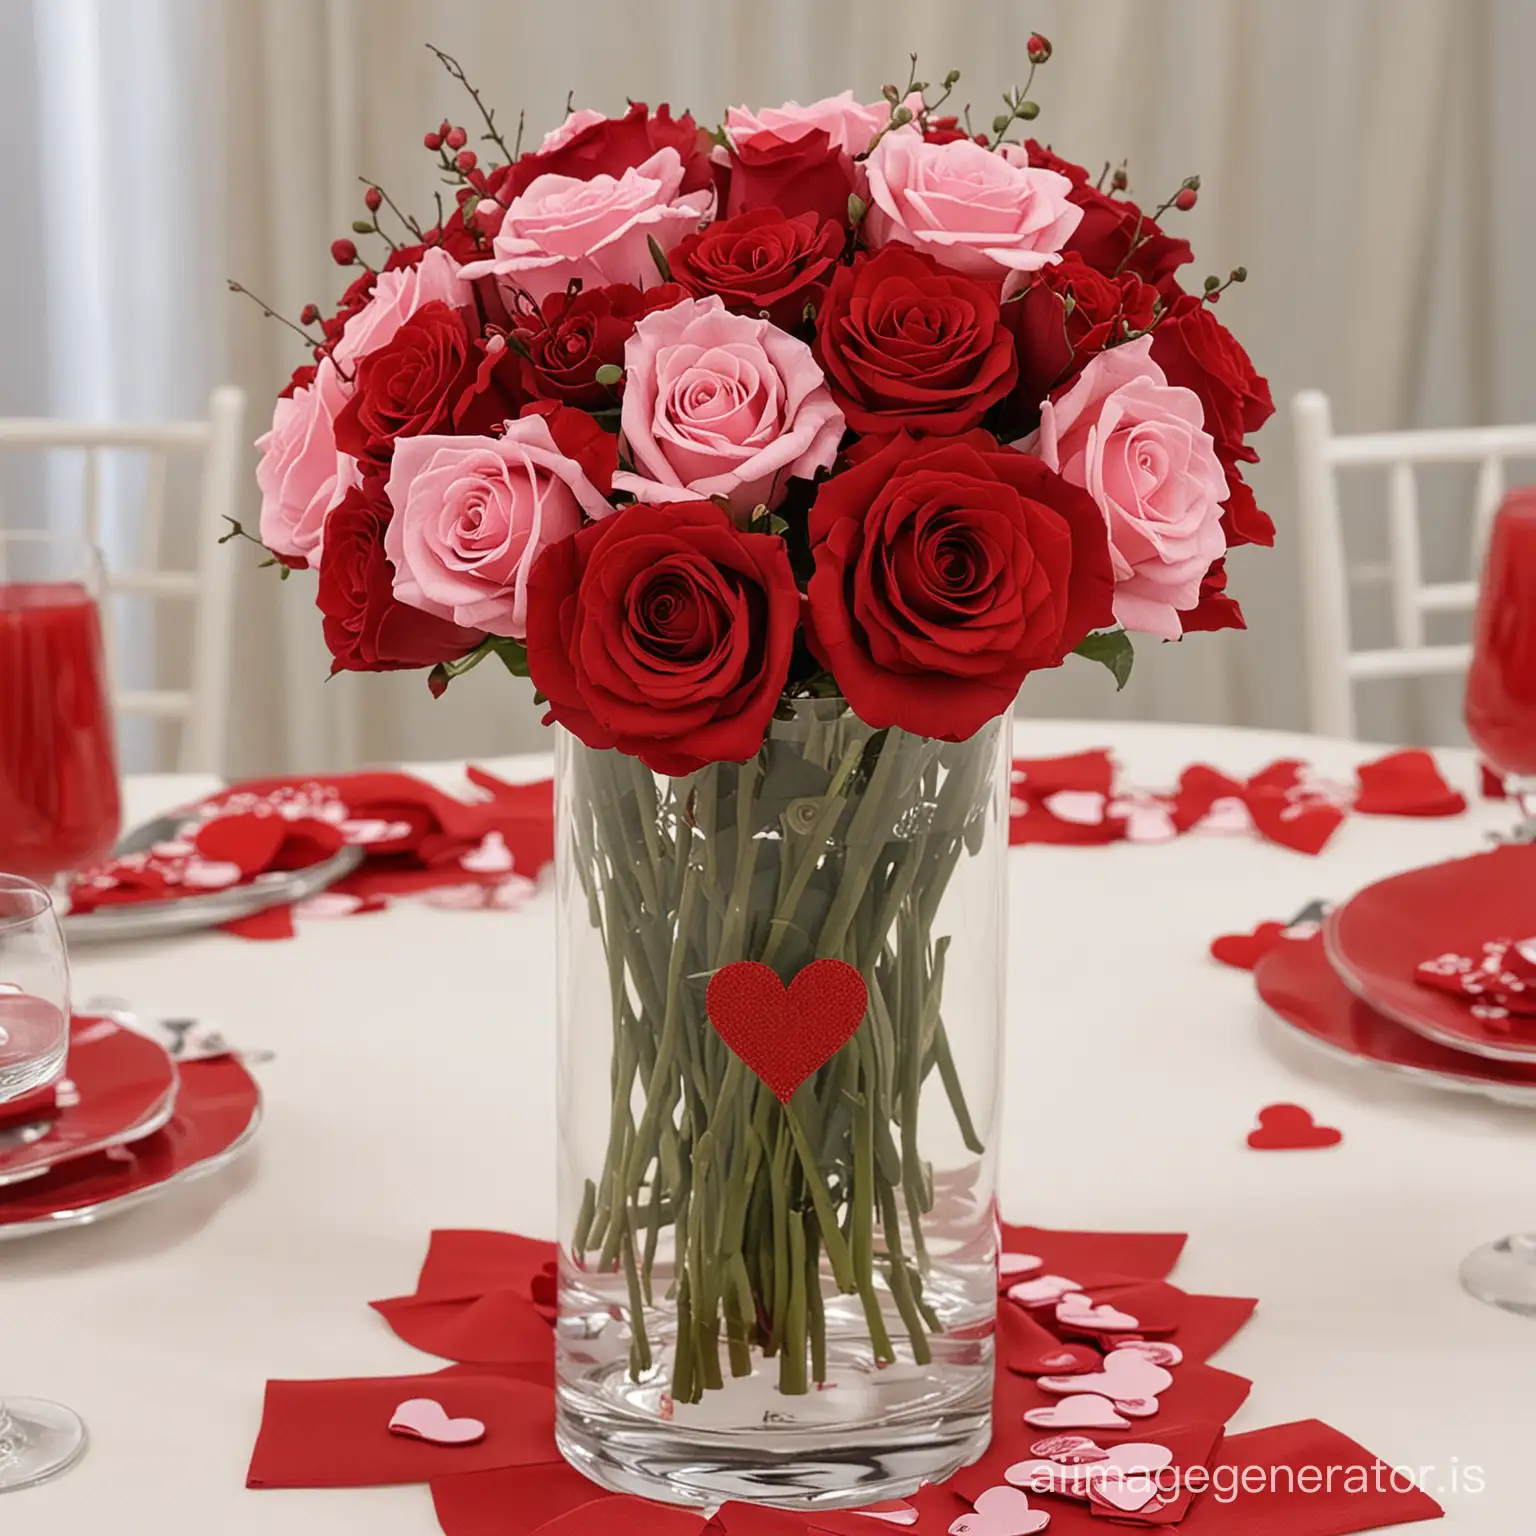 Valentines-Day-Themed-Wedding-Centerpiece-with-Romantic-Red-Roses